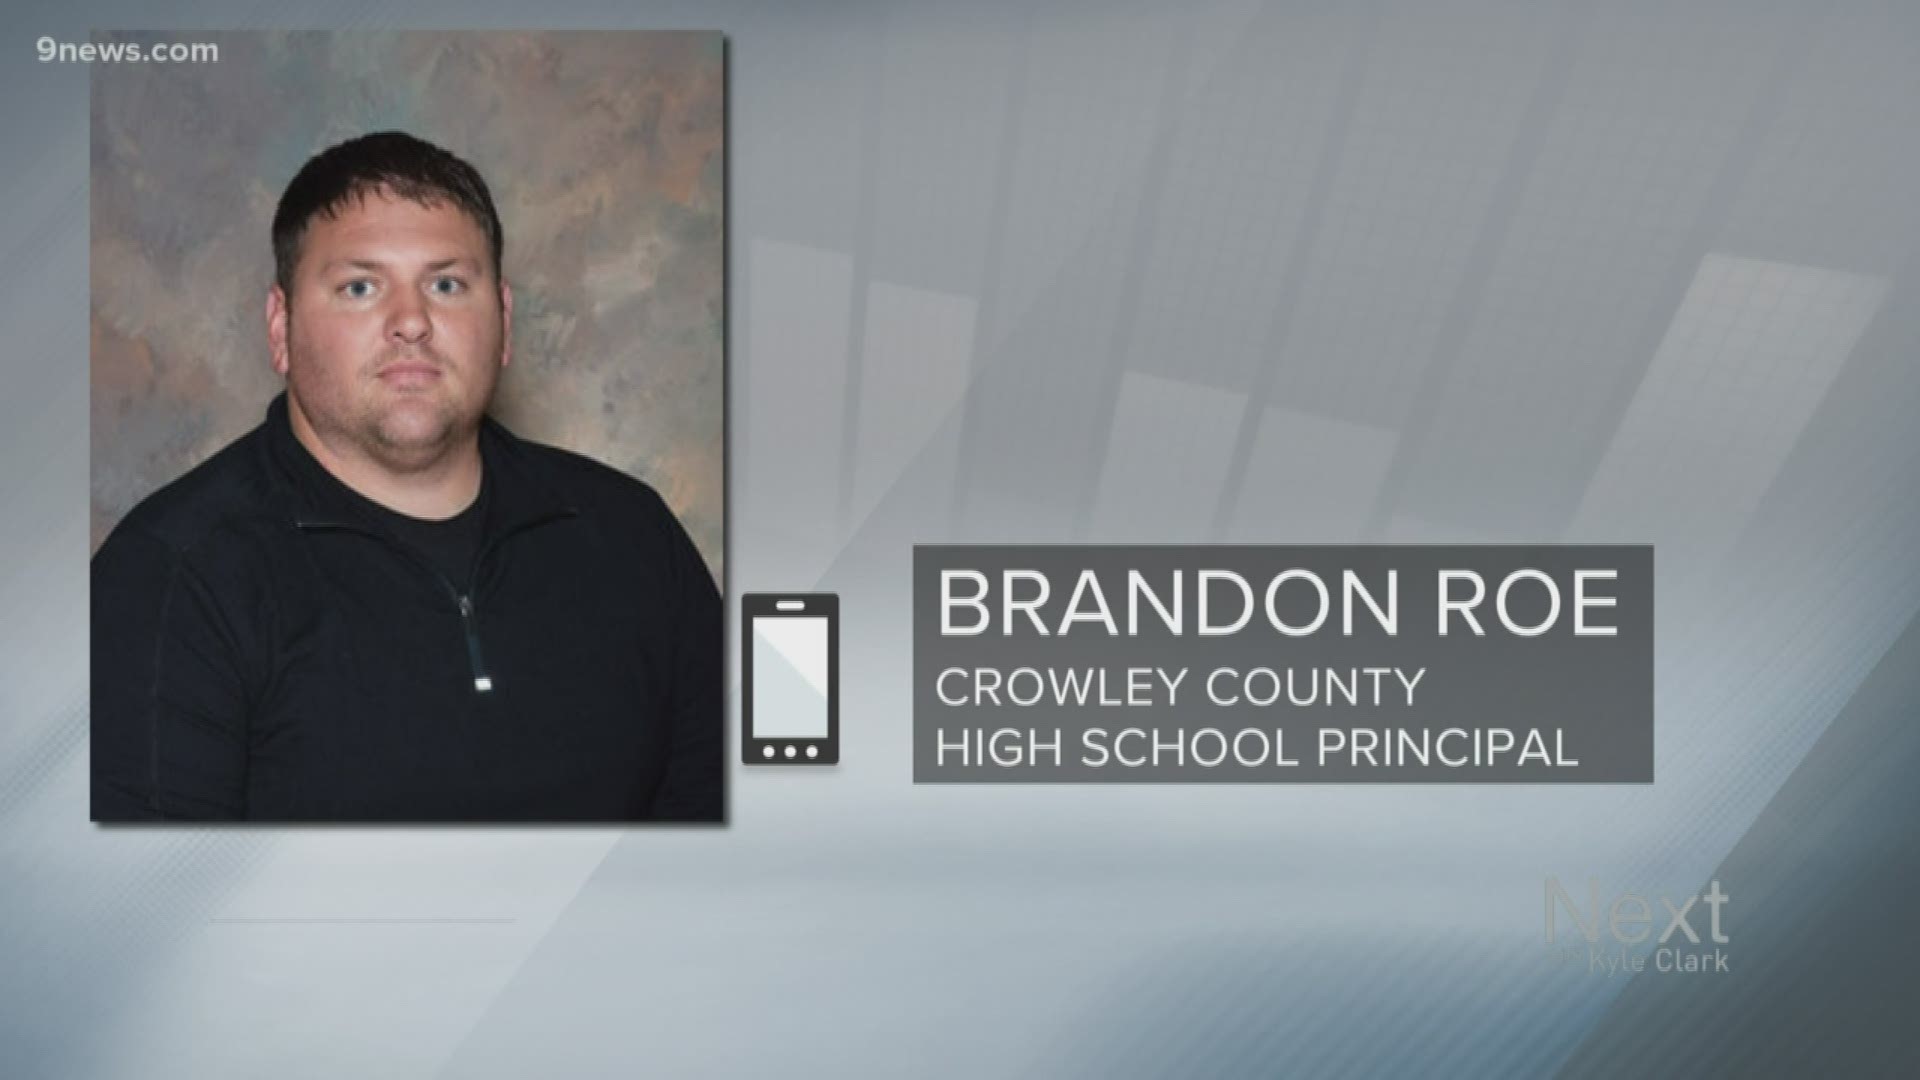 A rural Colorado high school is sending a message to its teenage students: vaping will not be tolerated. That’s according to a Facebook post from Crowley County High School, which canceled its game against Rocky Ford Jr./Sr. High School “due to team issues regarding vaping and other school infractions.”